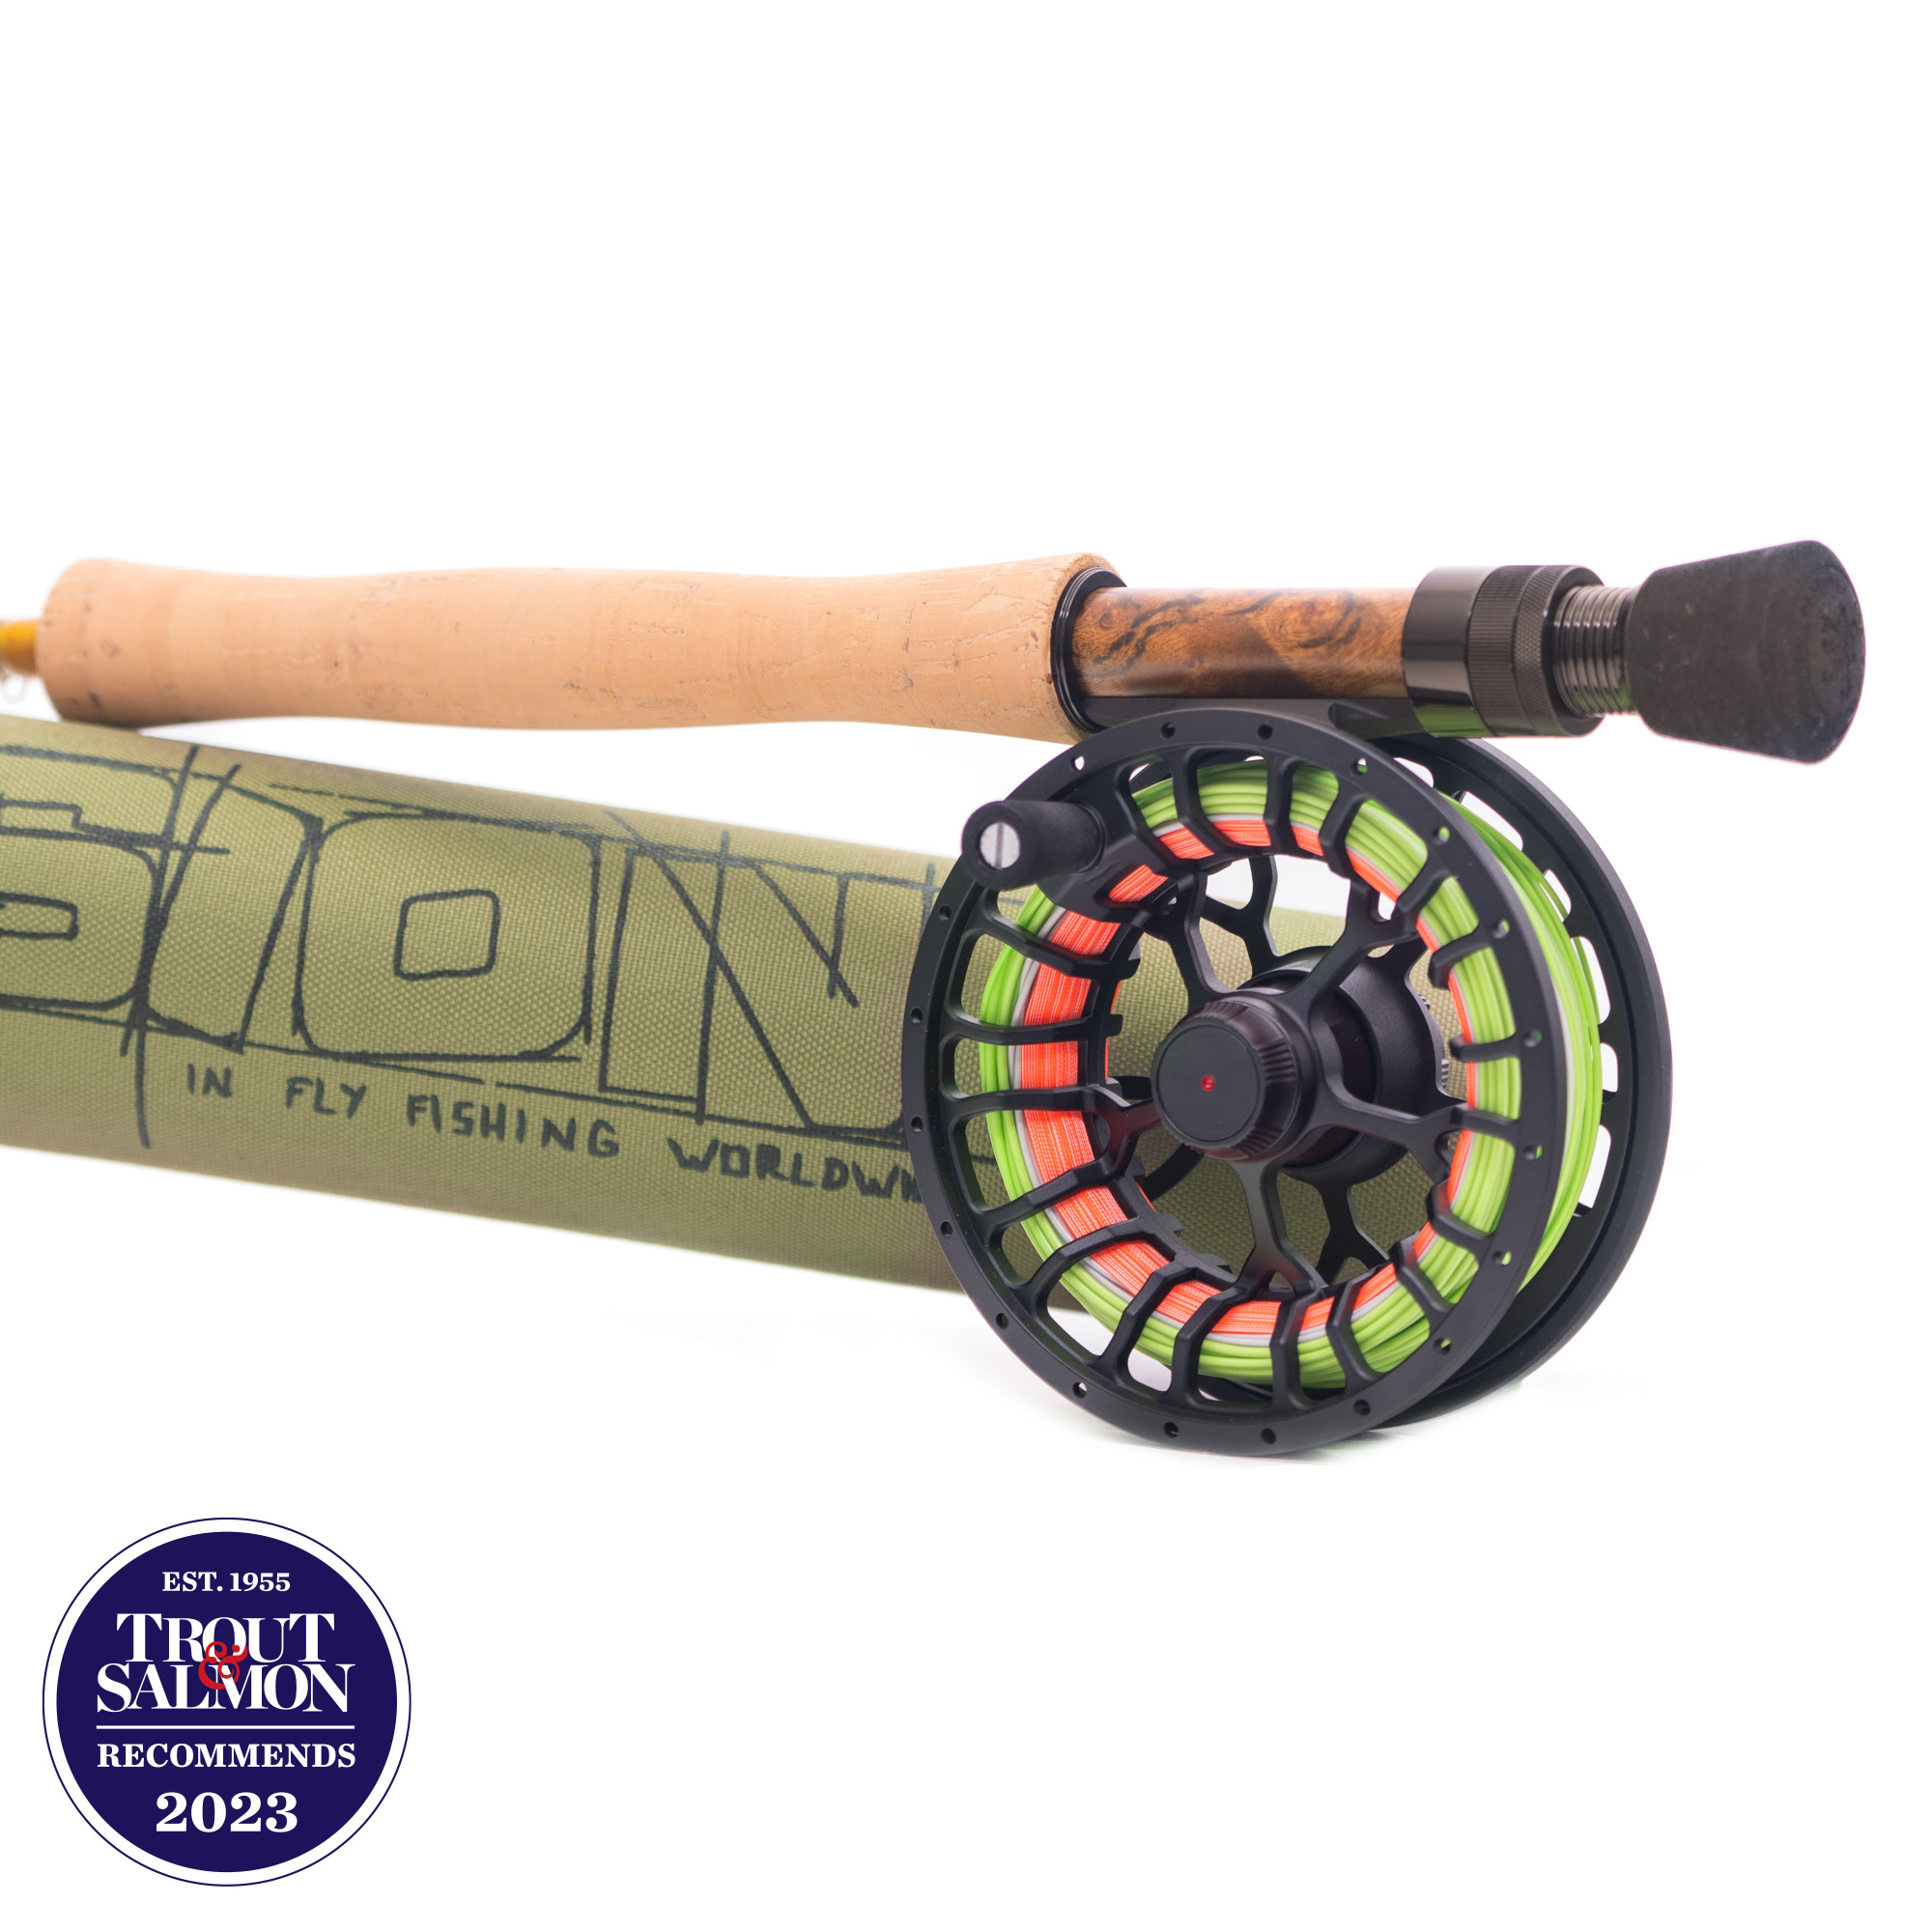 Best Fly Fishing Reel for Salmon - Guide Recommended